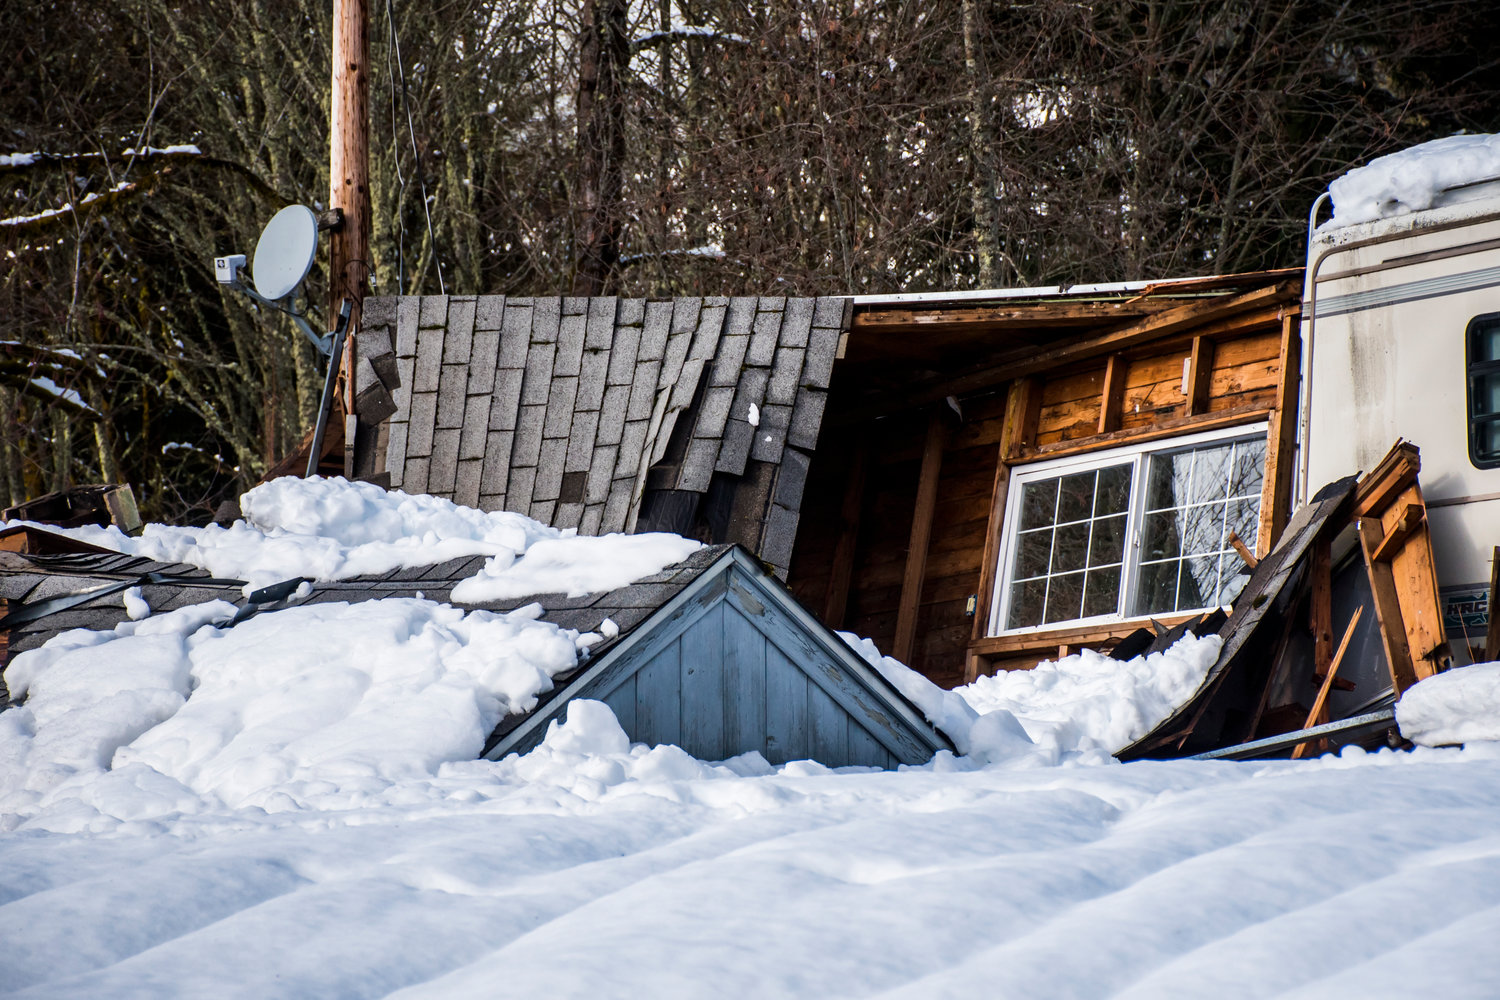 A collapsed residence was unoccupied when a snowstorm brought the house down, seen Wednesday afternoon in Mineral.